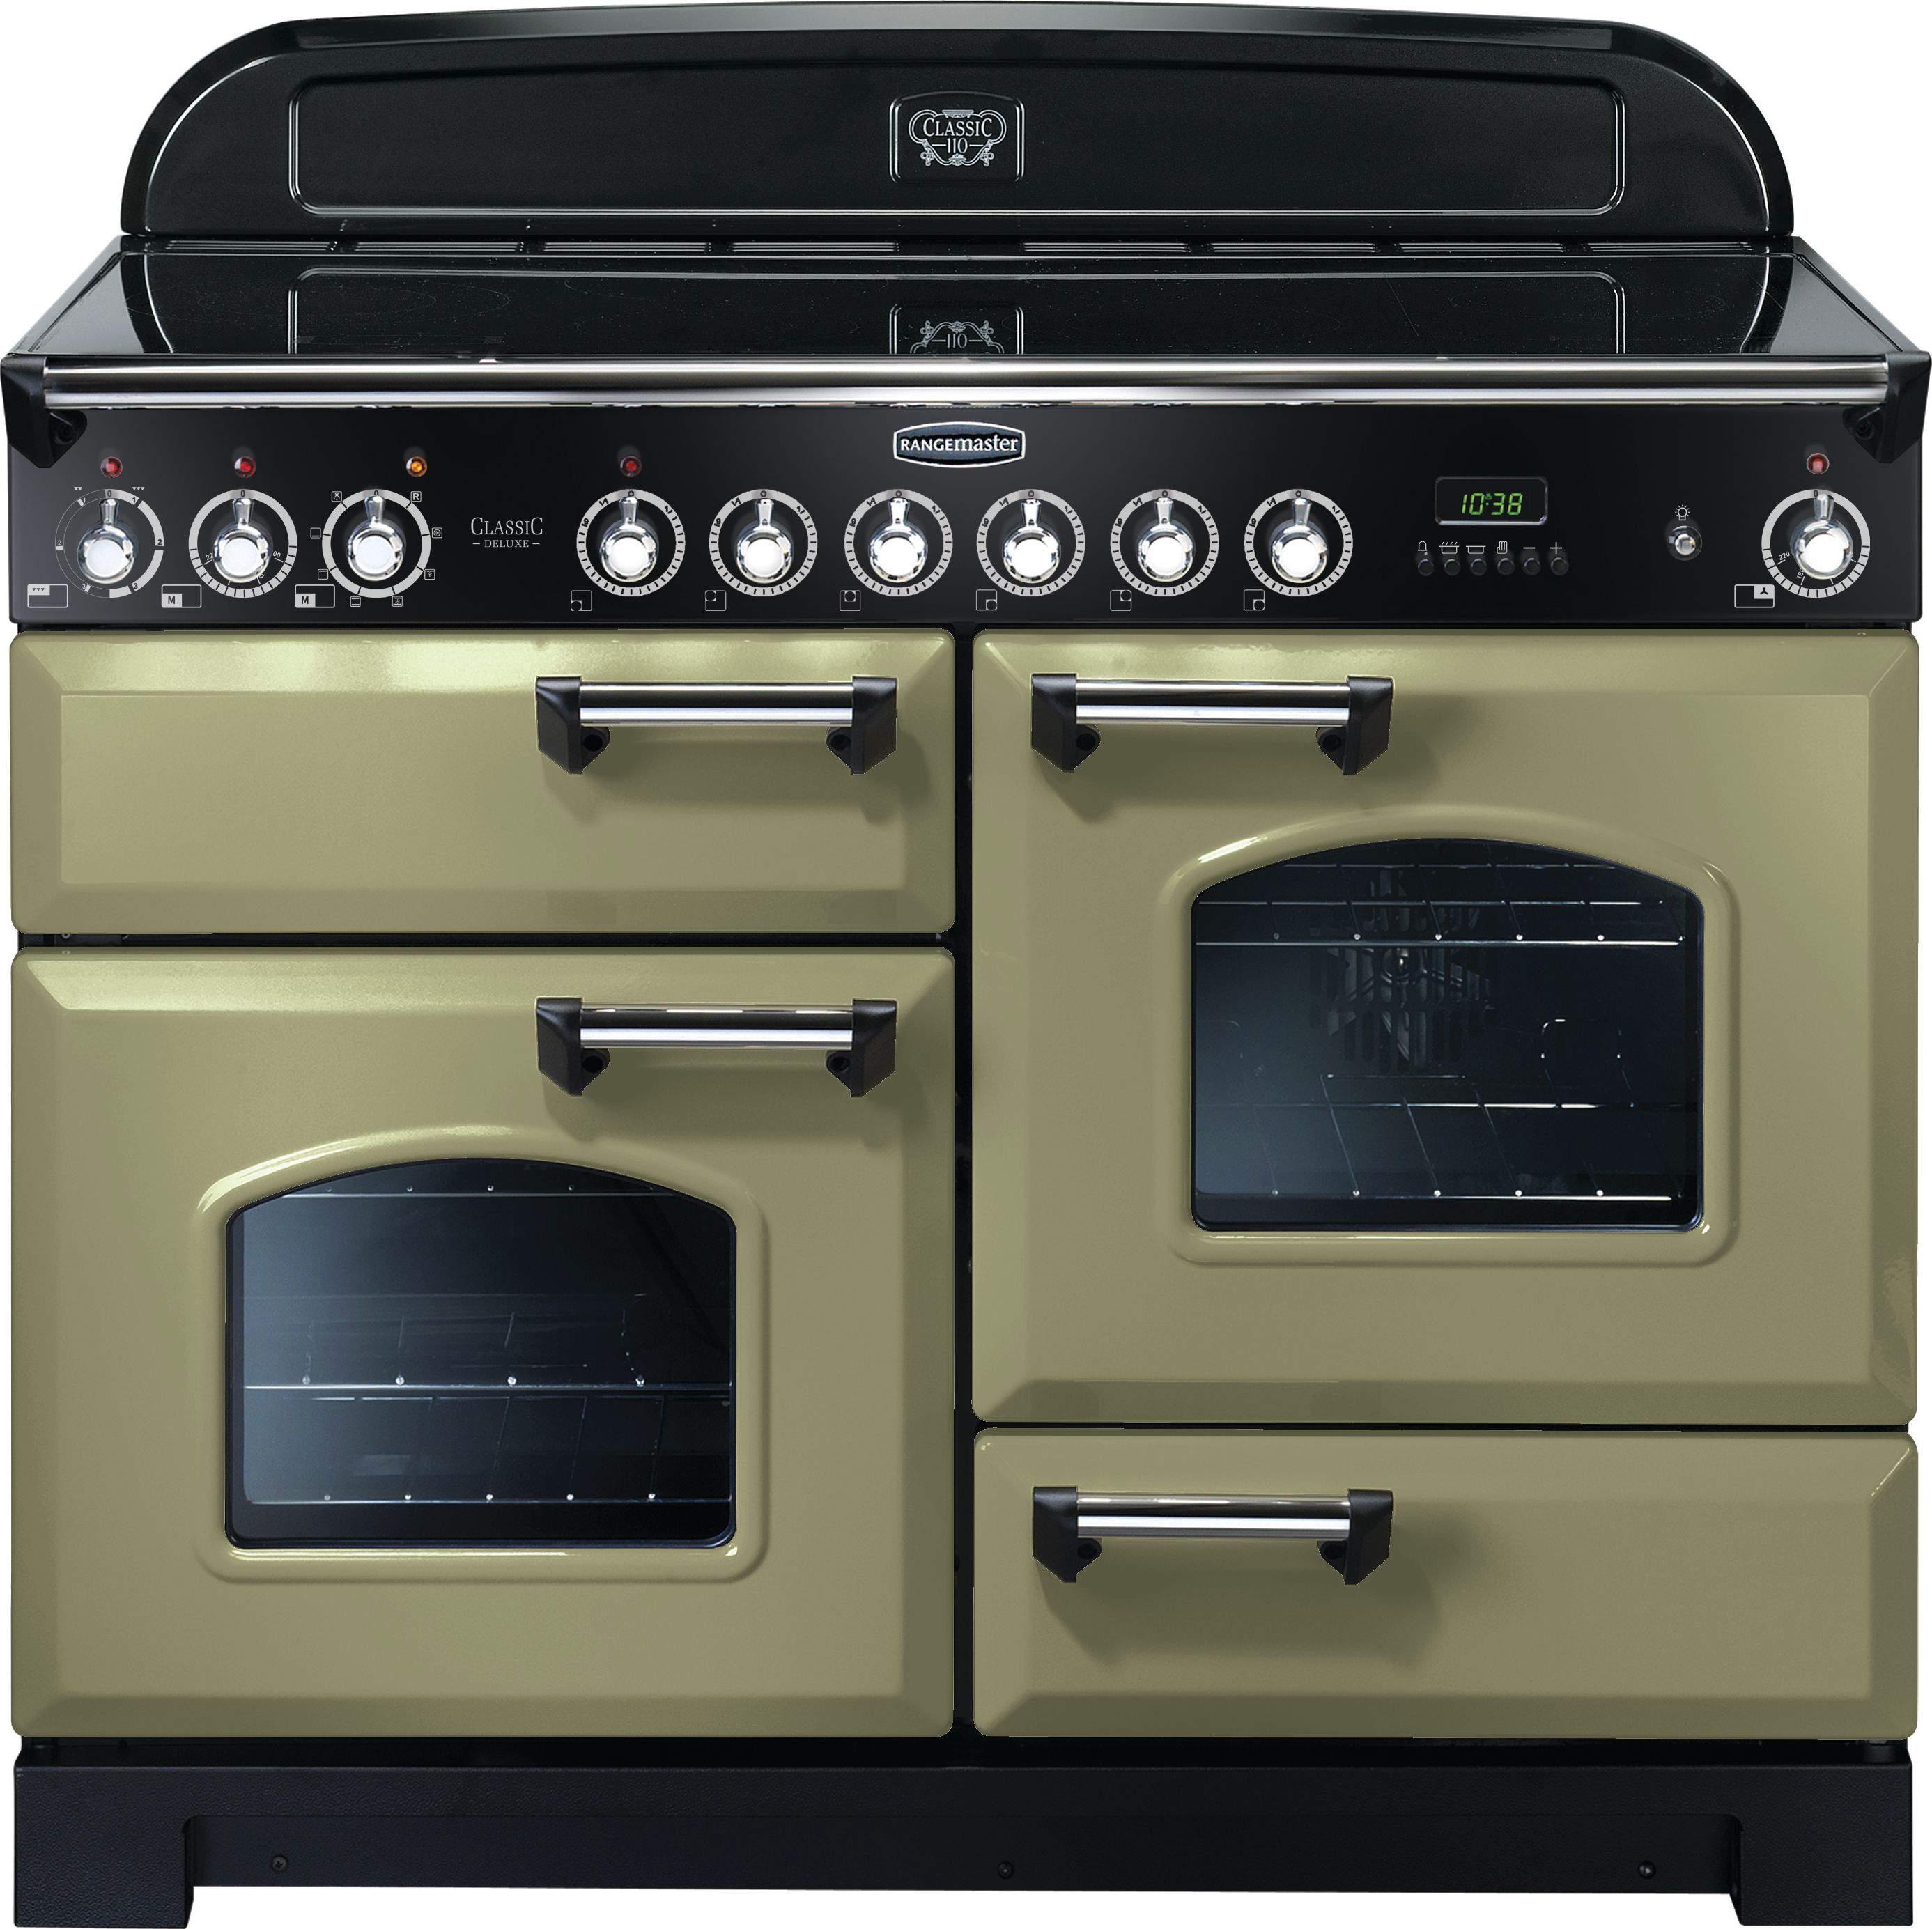 Rangemaster Classic Deluxe CDL110ECOG/C 110cm Electric Range Cooker with Ceramic Hob - Olive Green / Chrome - A/A Rated, Green